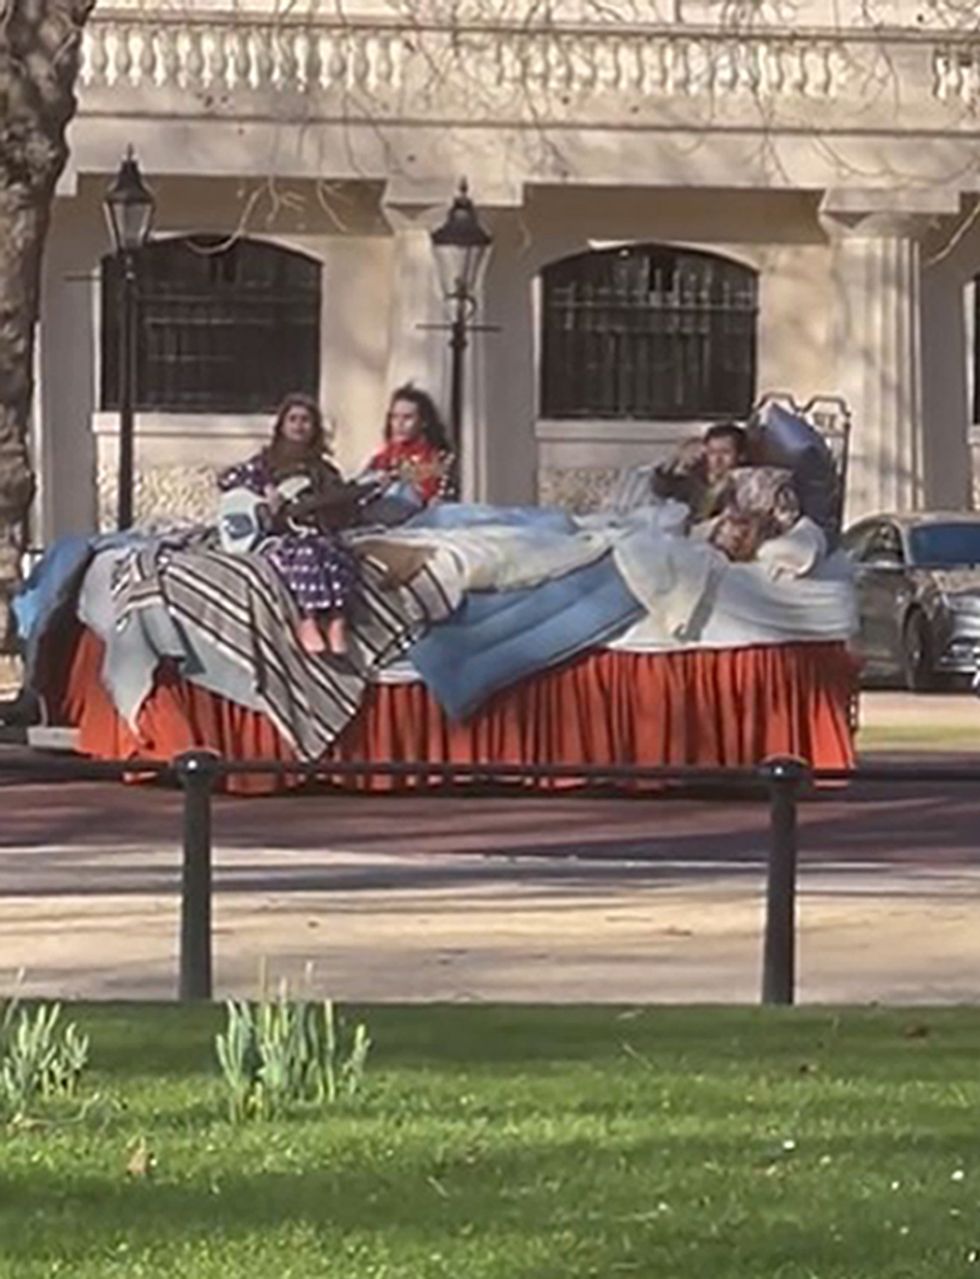 Harry Styles spotted filming in large bed in front of Buckingham Palace